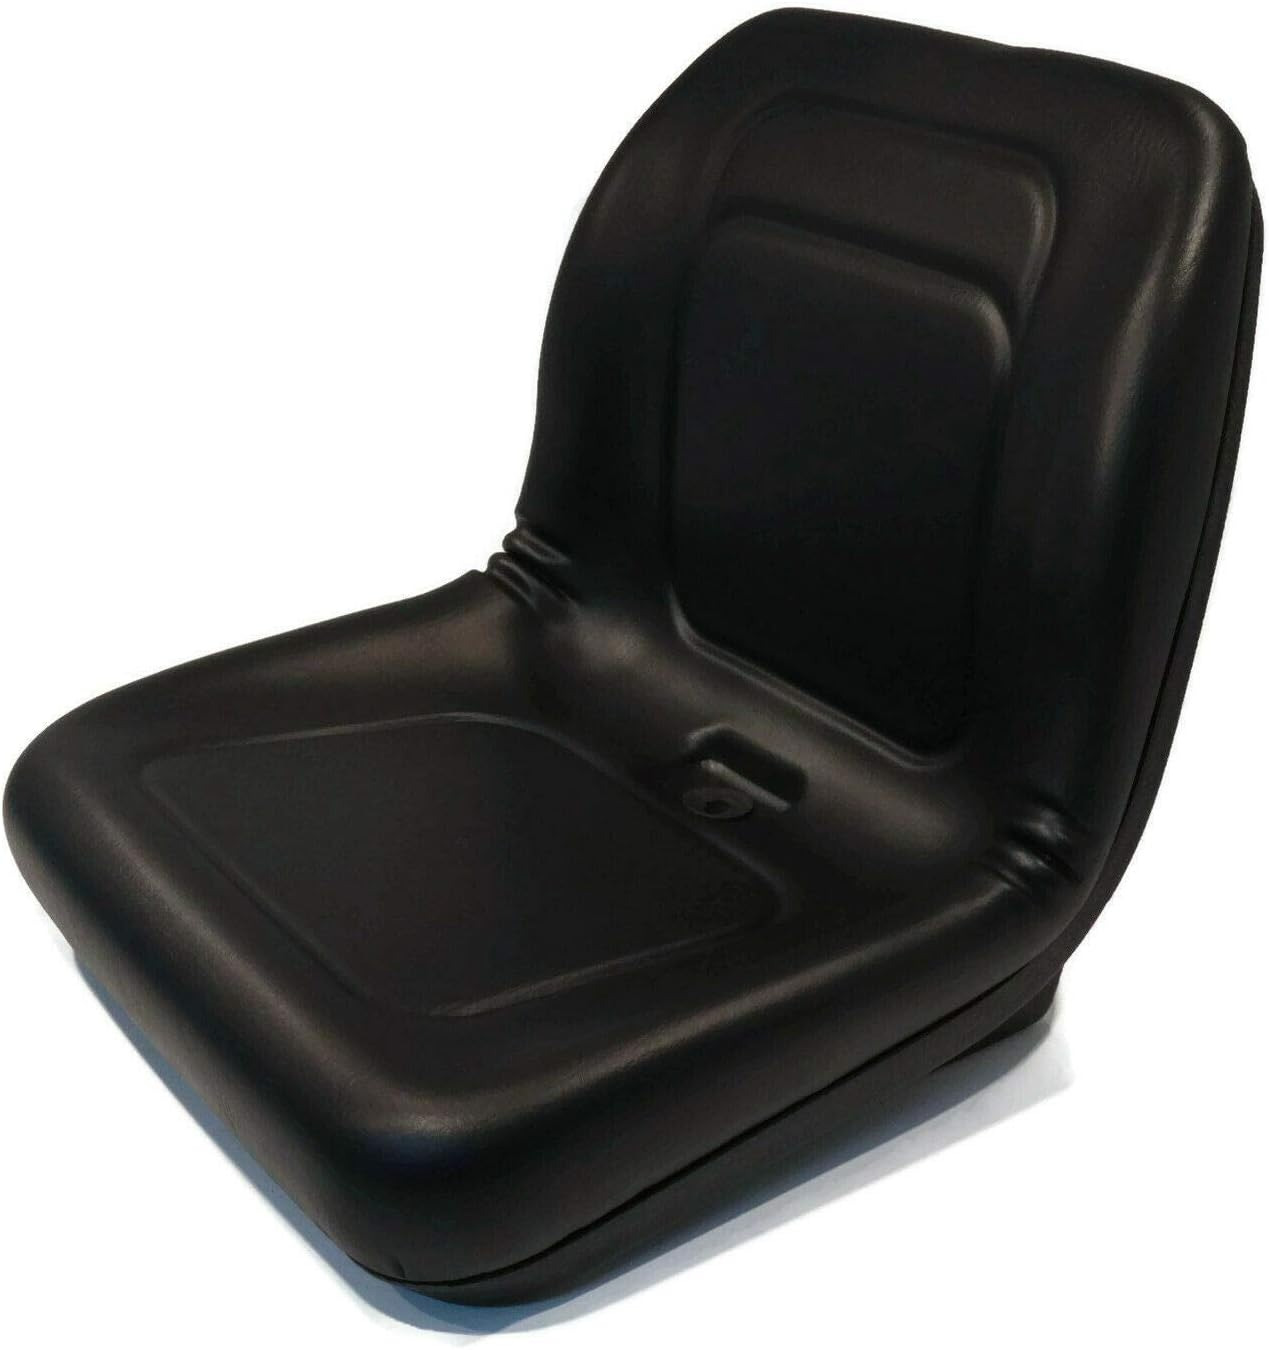 | Black High Back Seat for 2007 Exmark QST24BE522 & Ferris IS500Z, IS700Z, IS150